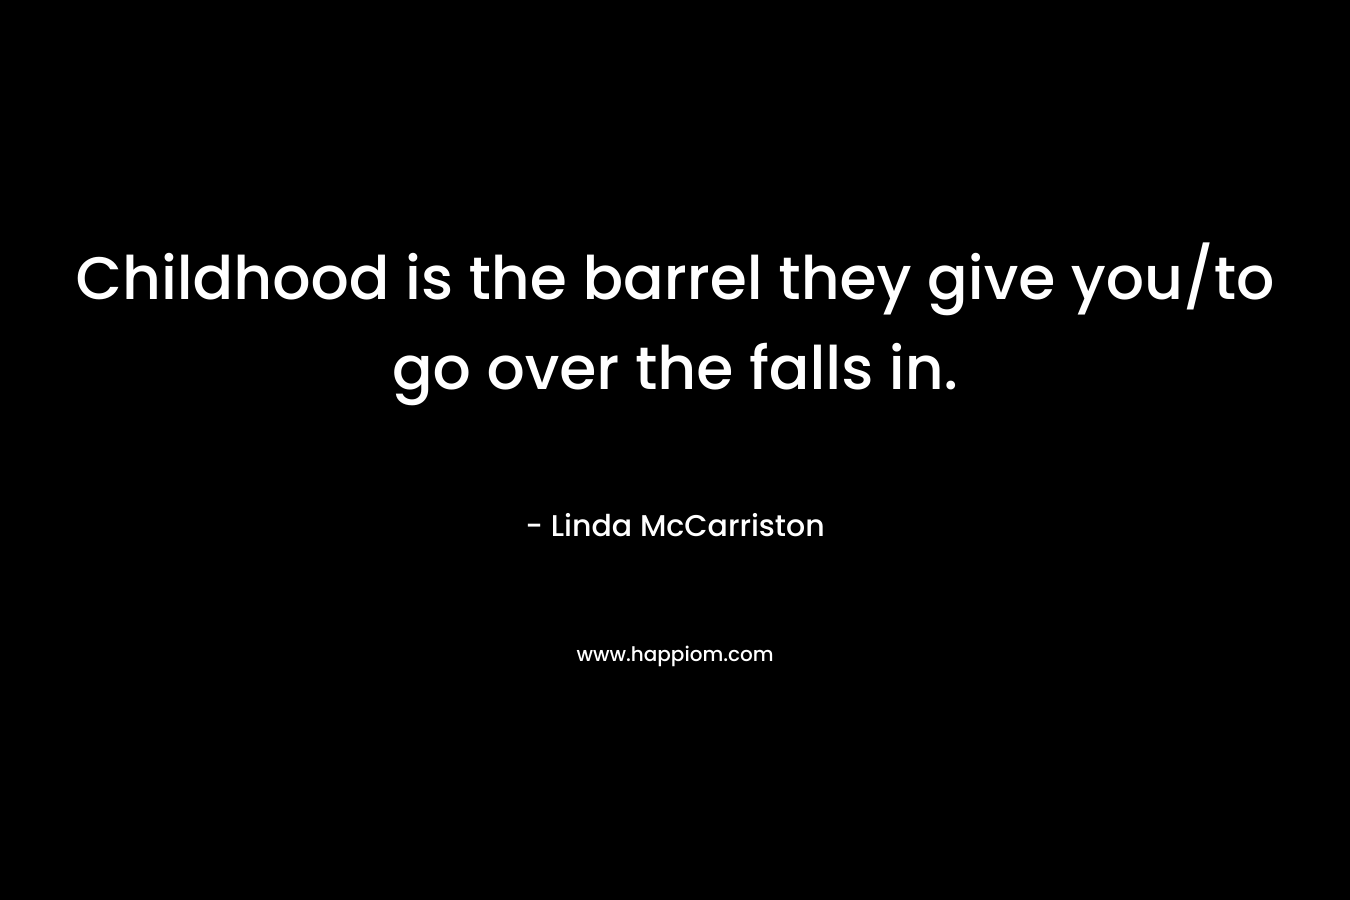 Childhood is the barrel they give you/to go over the falls in. – Linda McCarriston